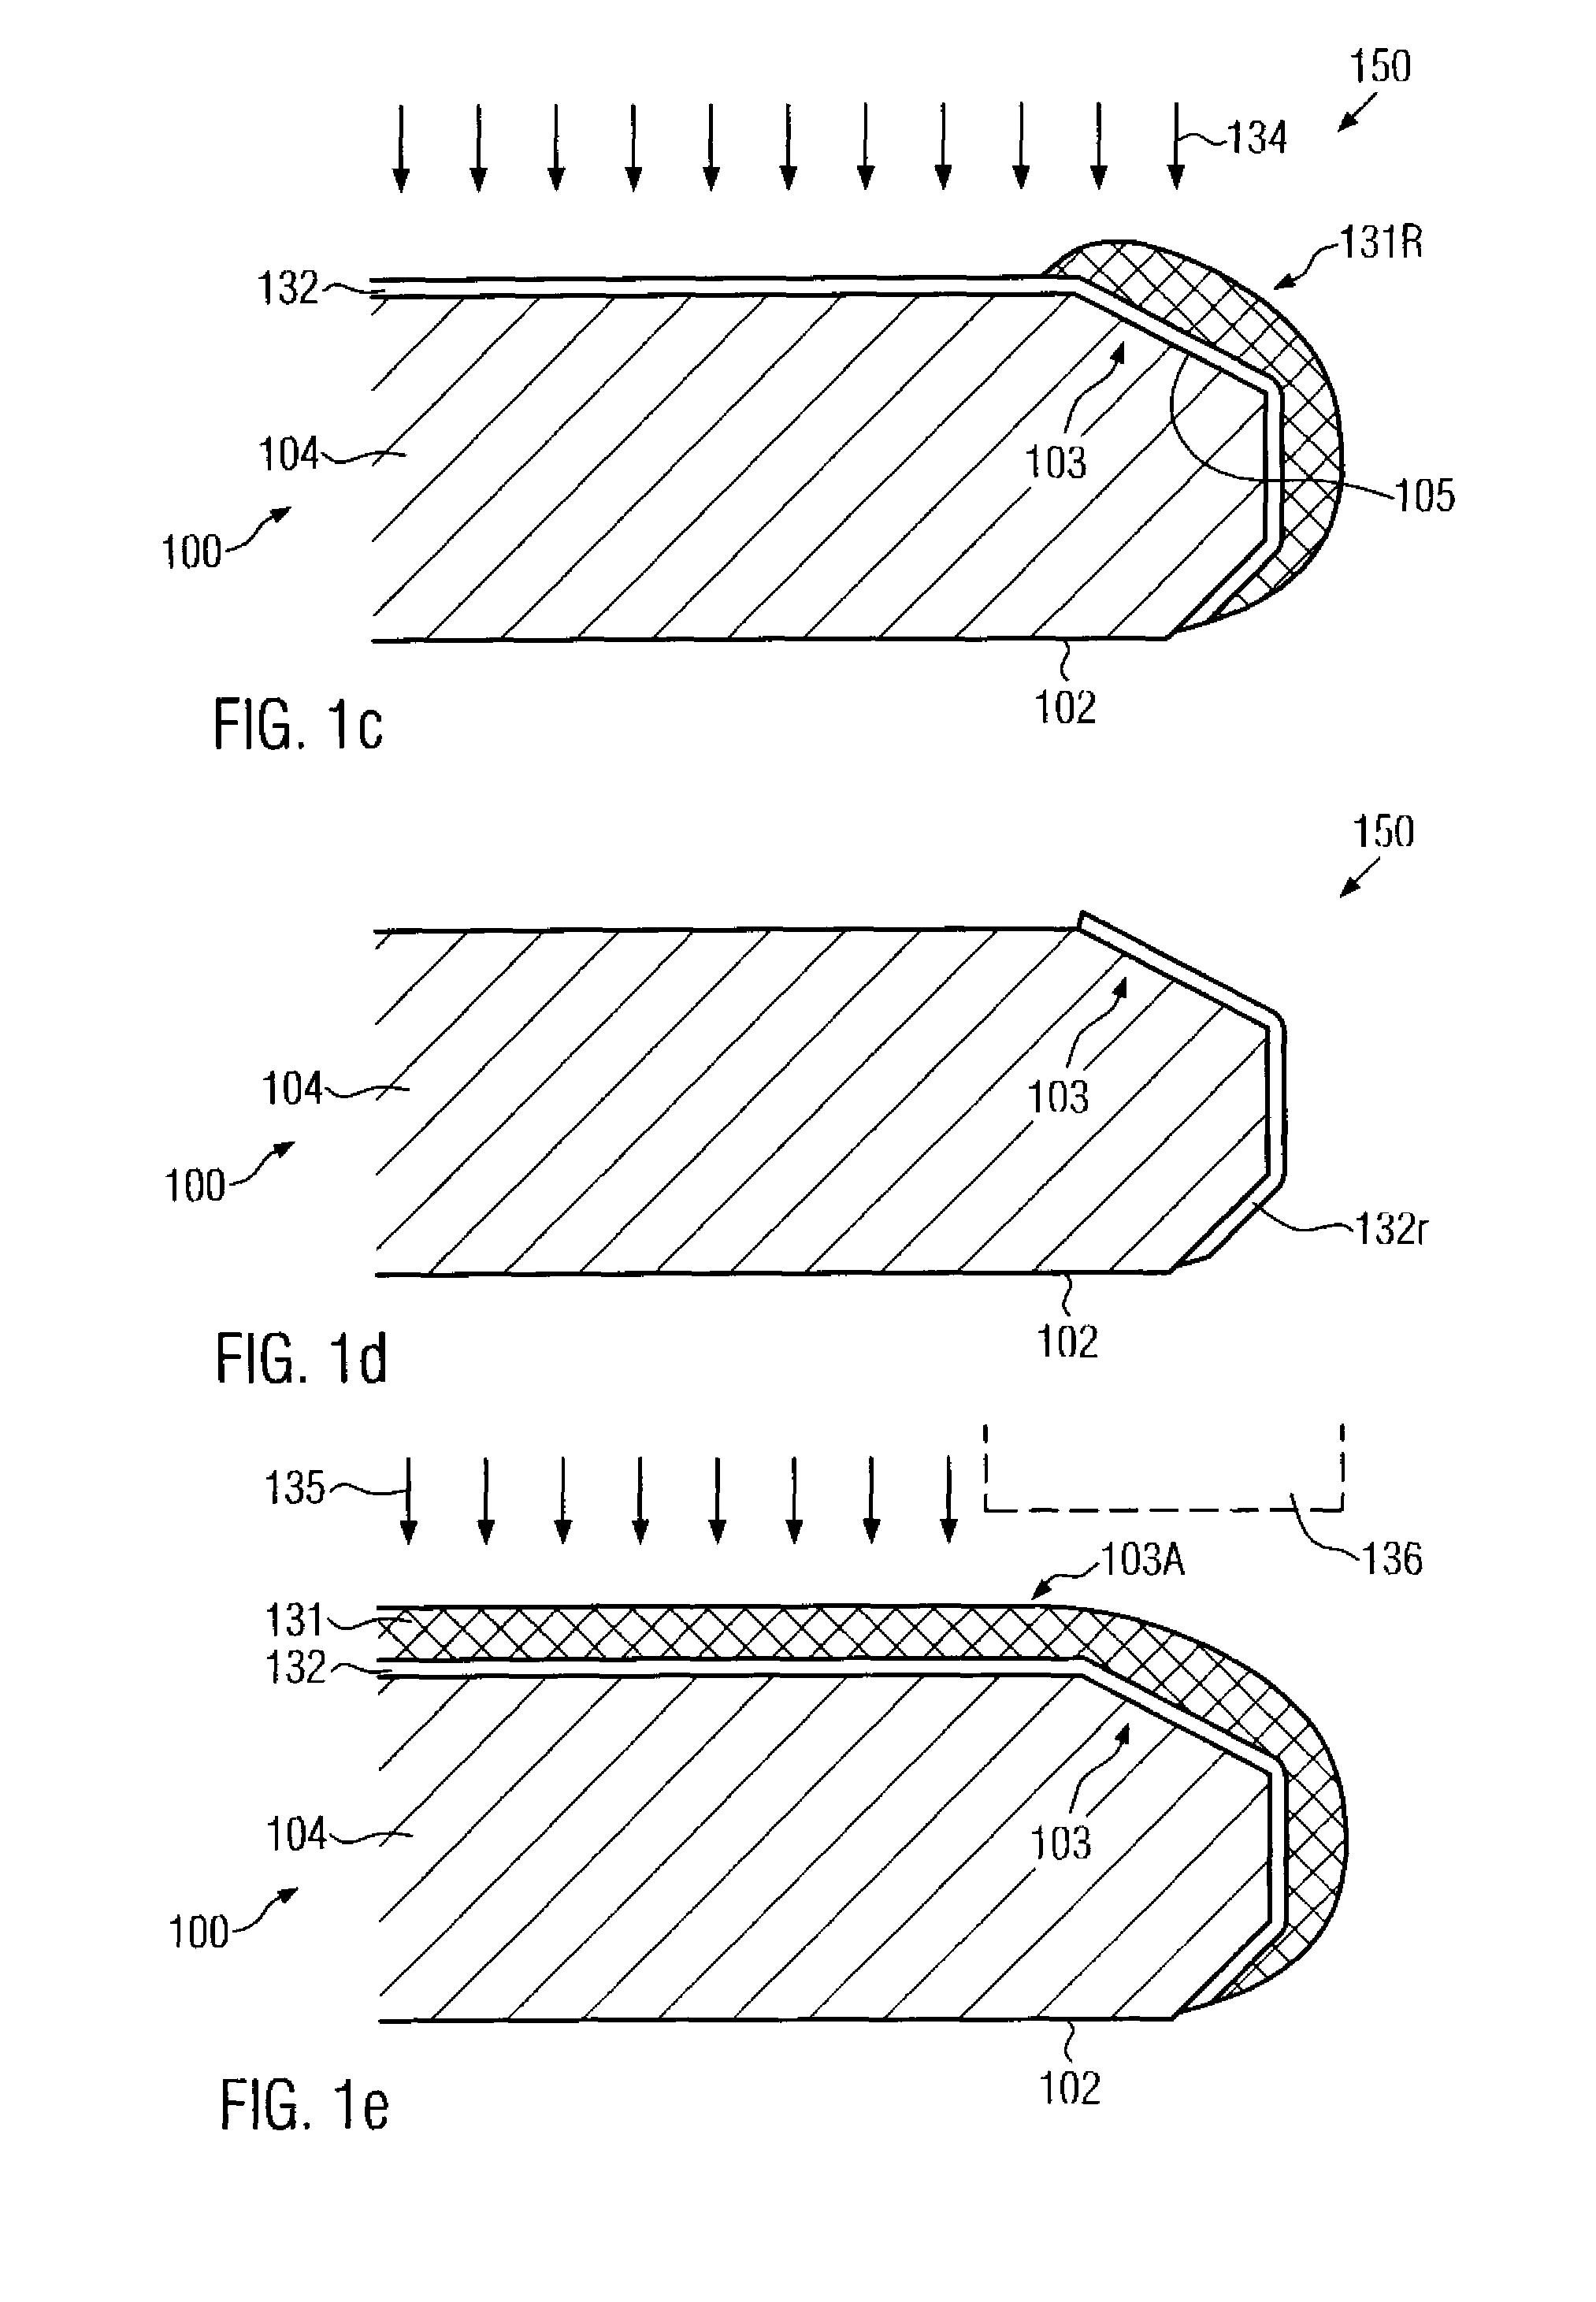 Method of reducing contamination by providing an etch stop layer at the substrate edge